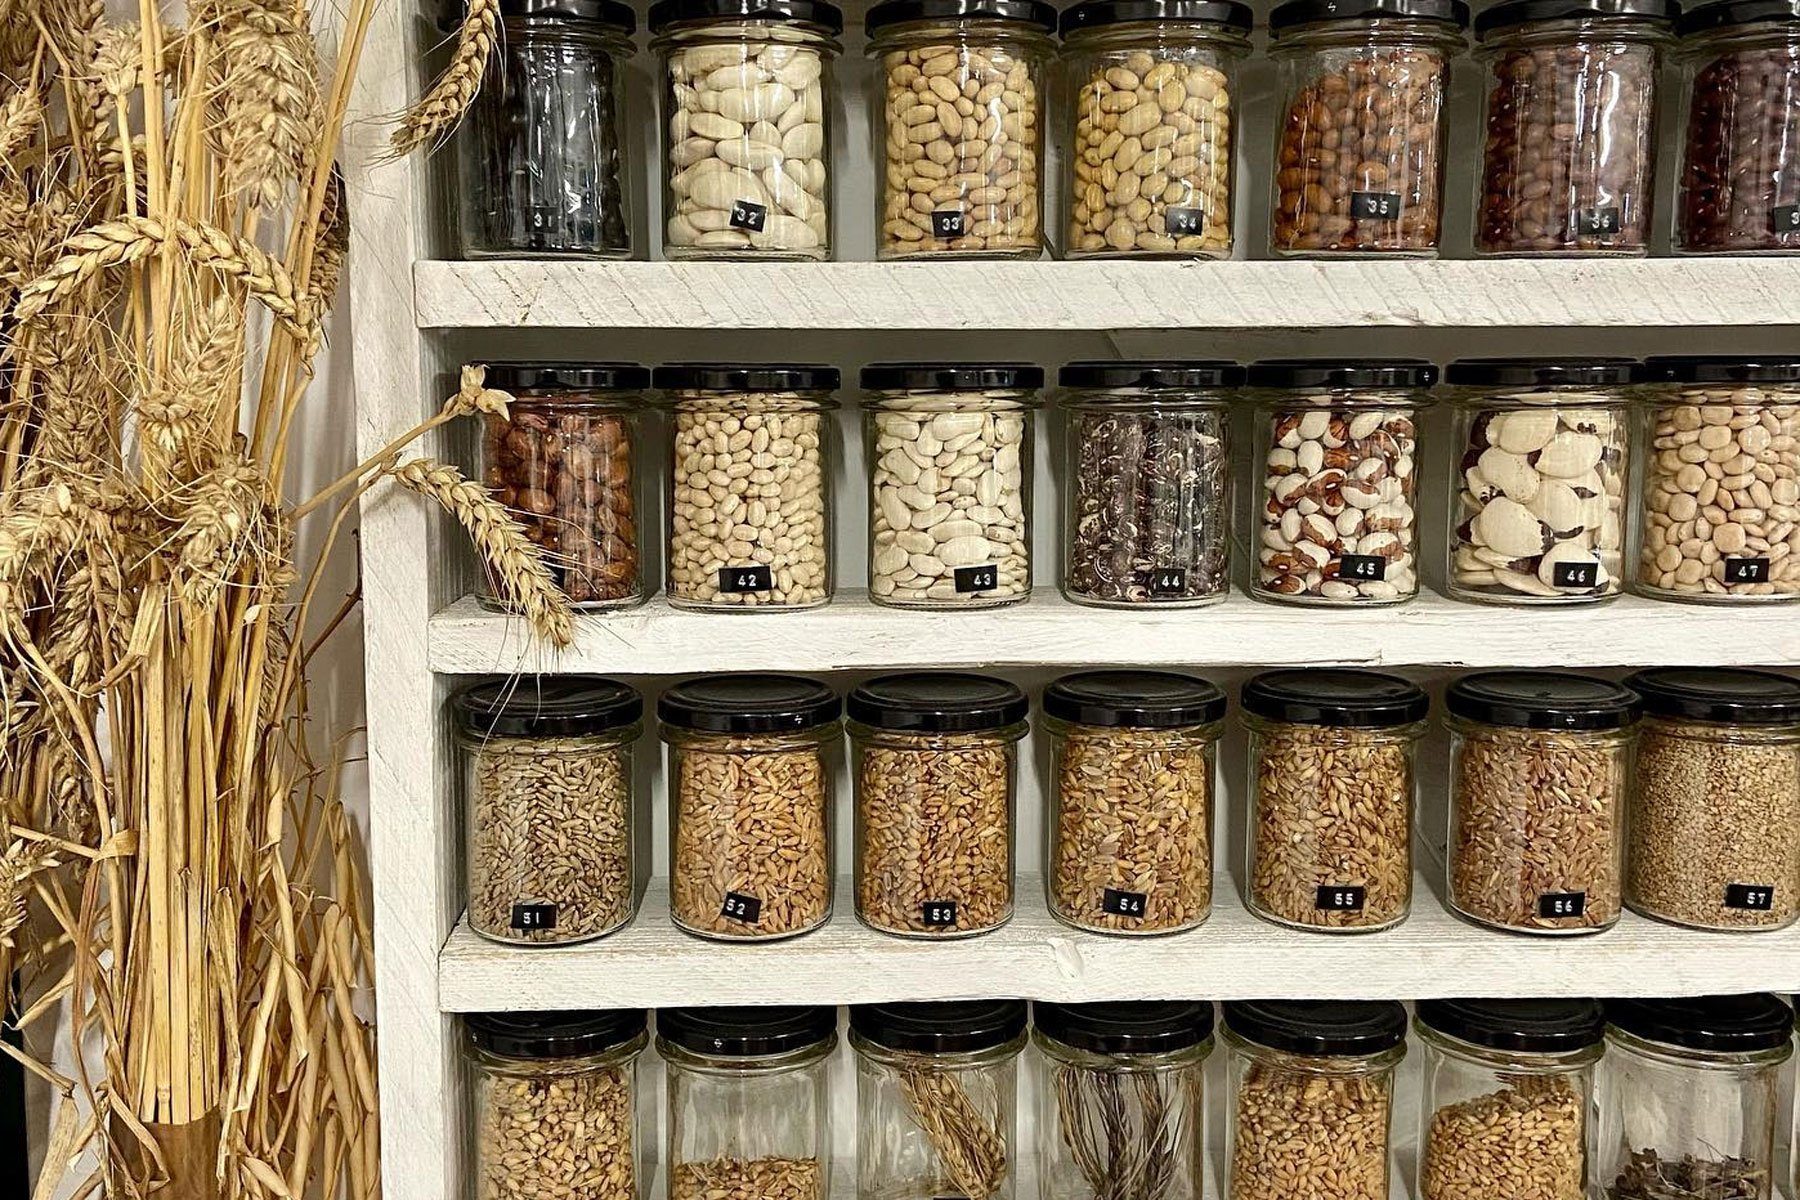 A Food Revolution Starts With Seed